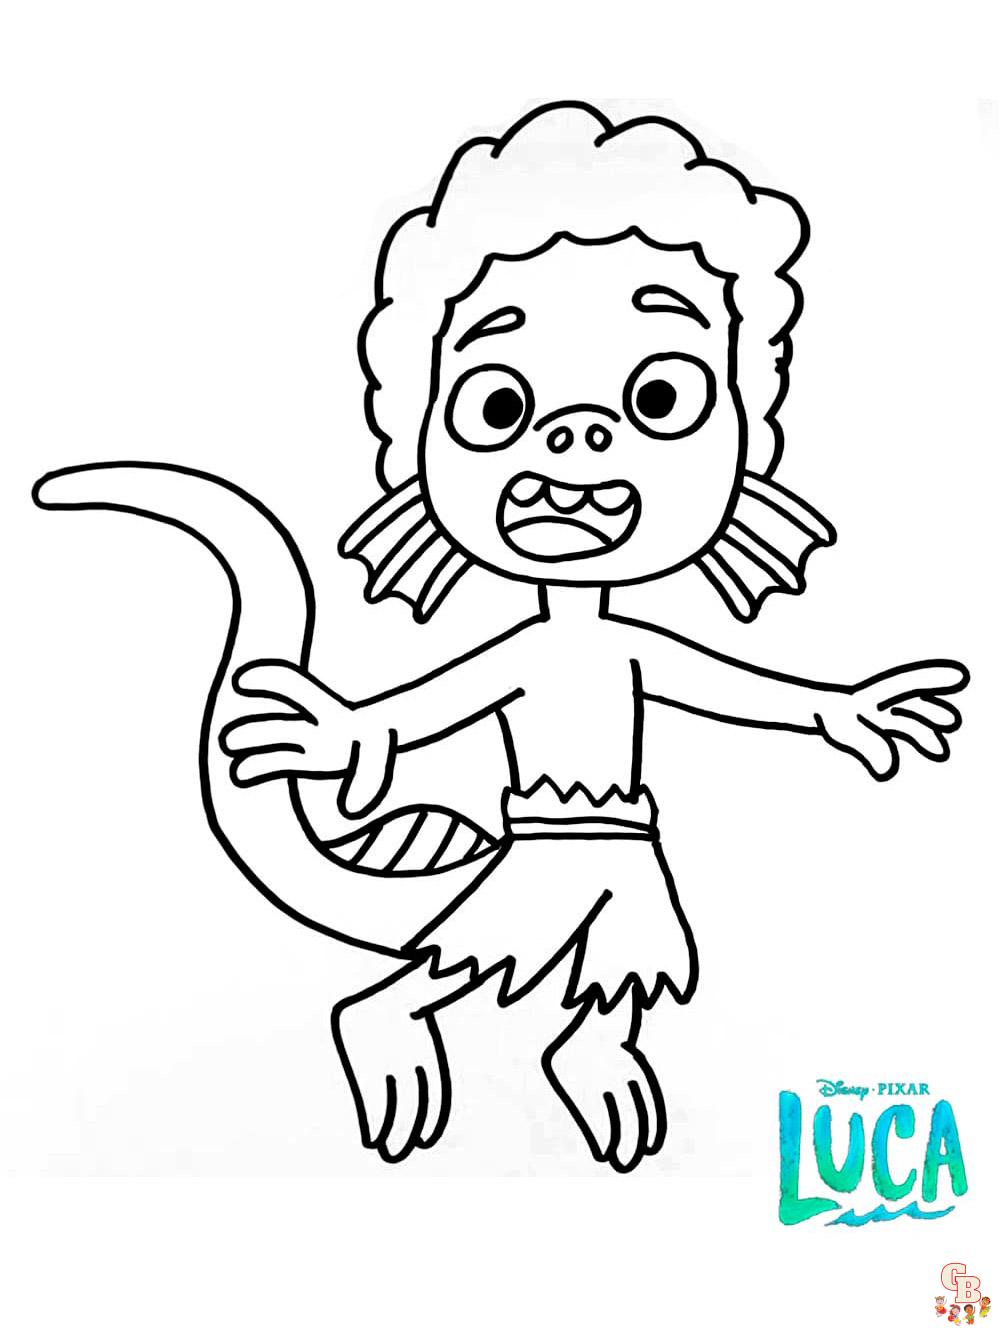 Luca Coloring Pages 4